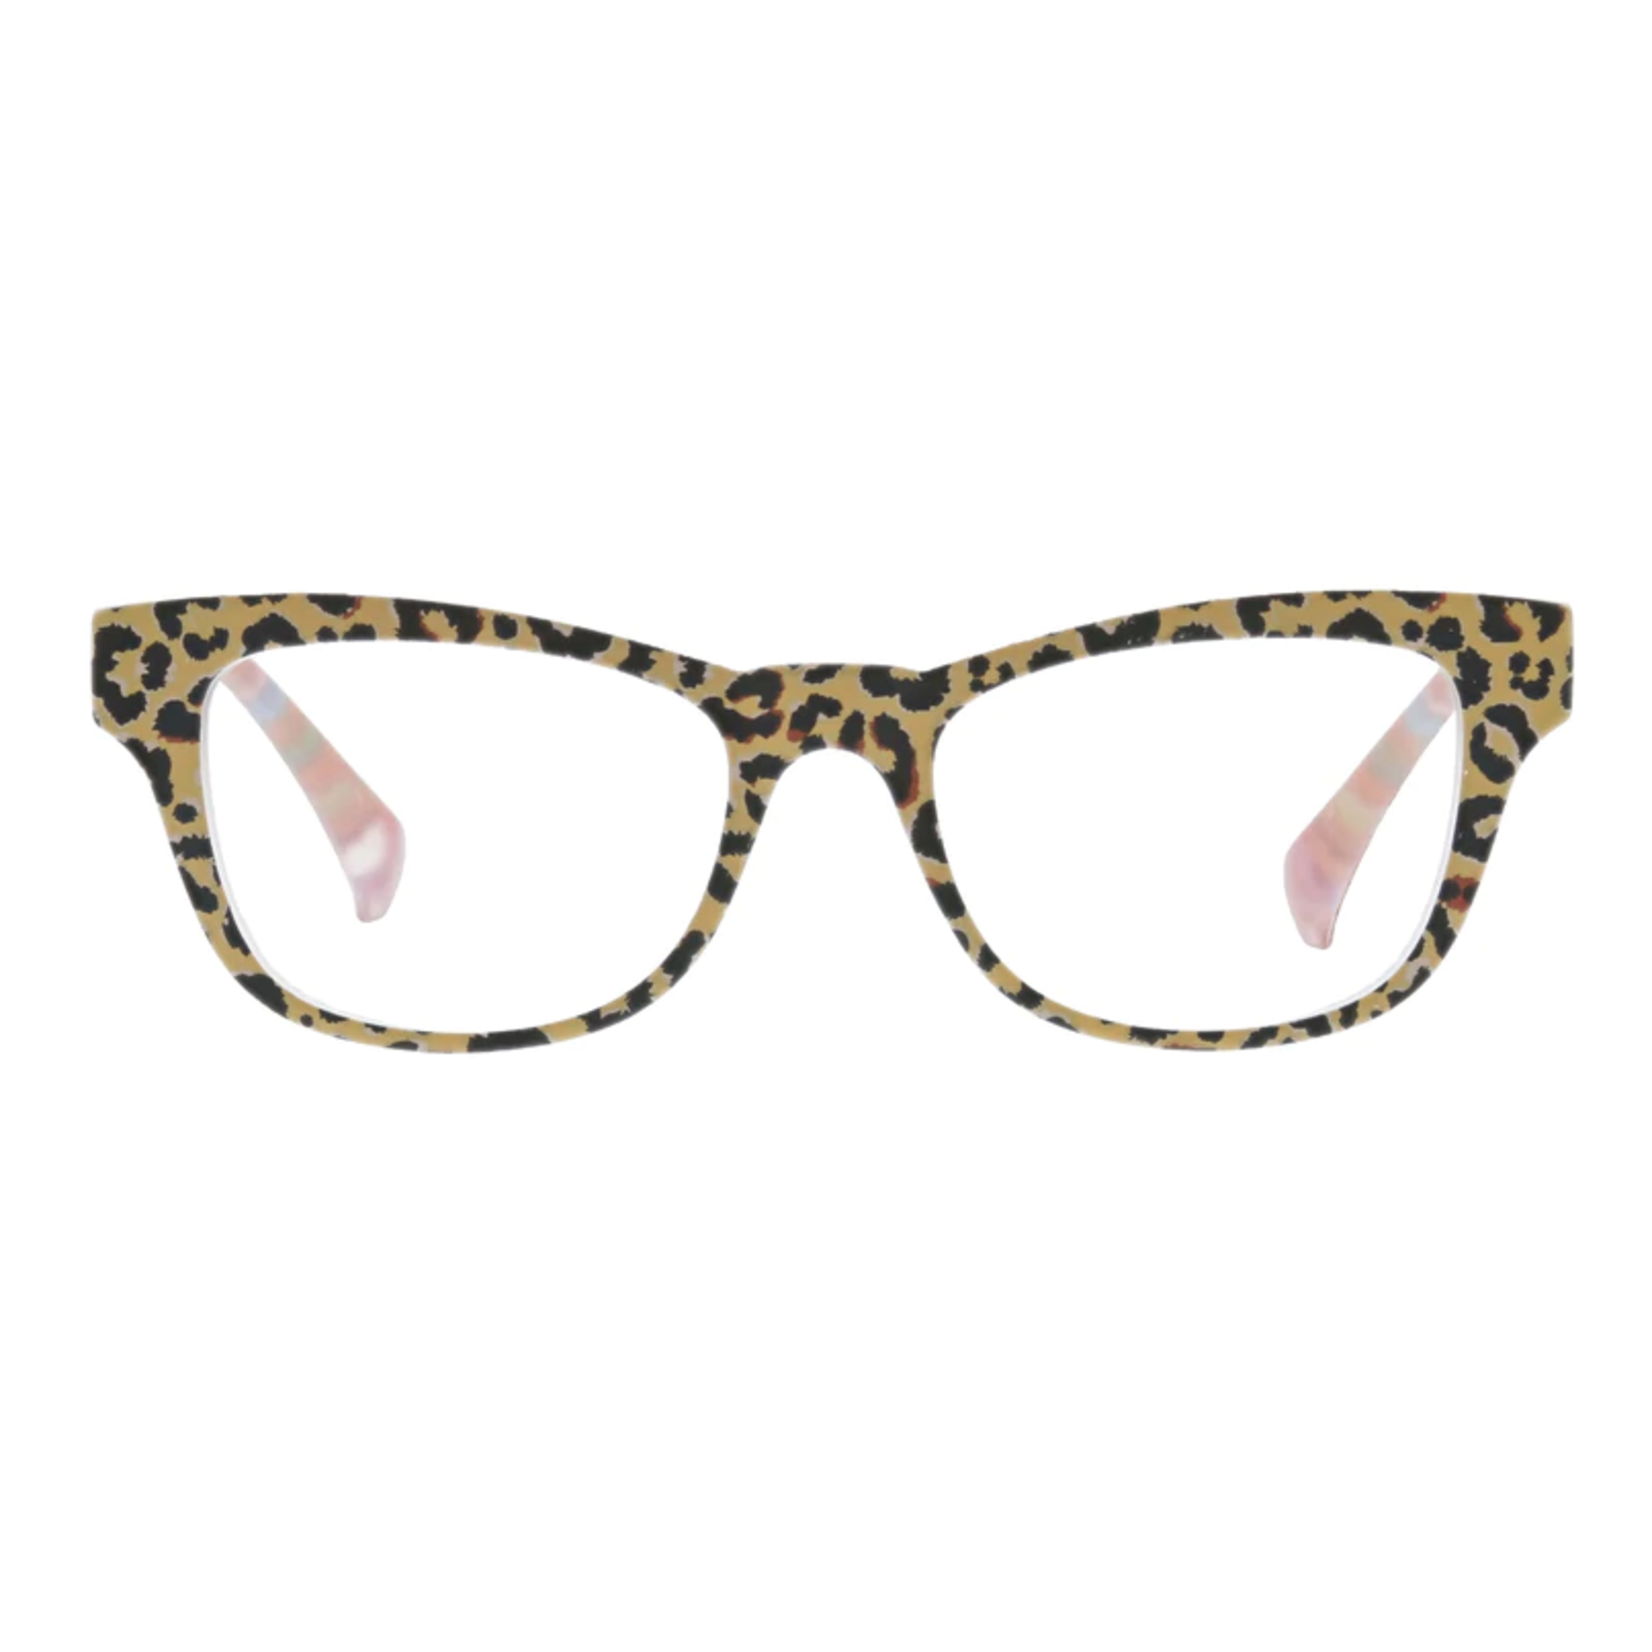 Peepers +2.25 Orchid Island Tan/Leopard Floral